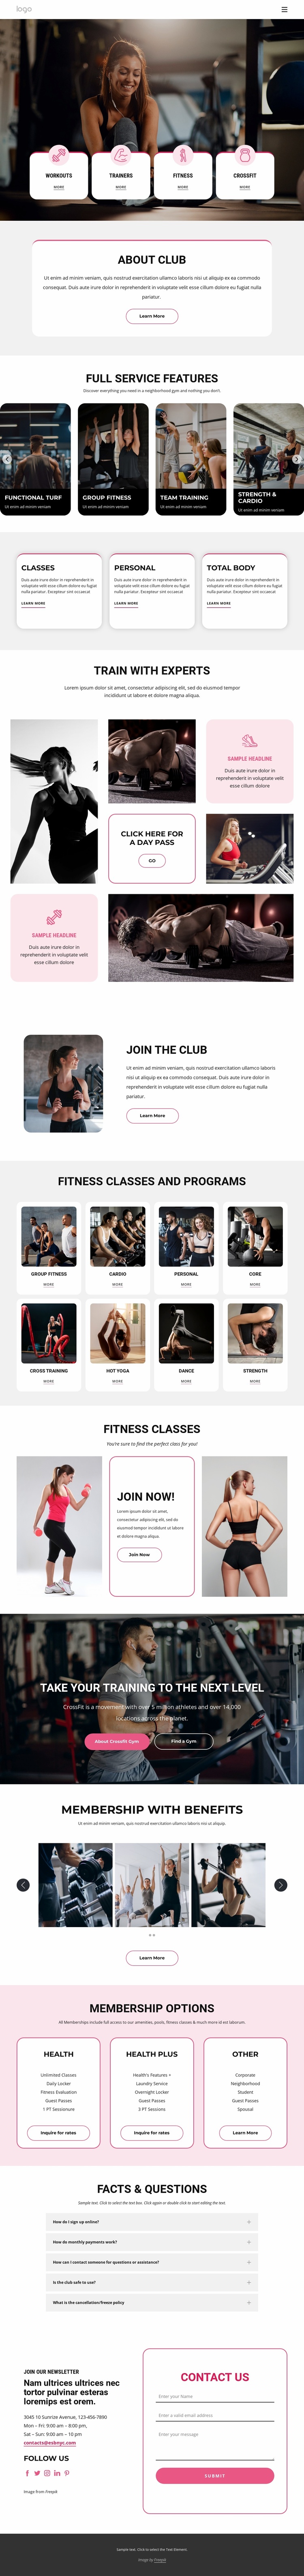 Our full-service gym Landing Page